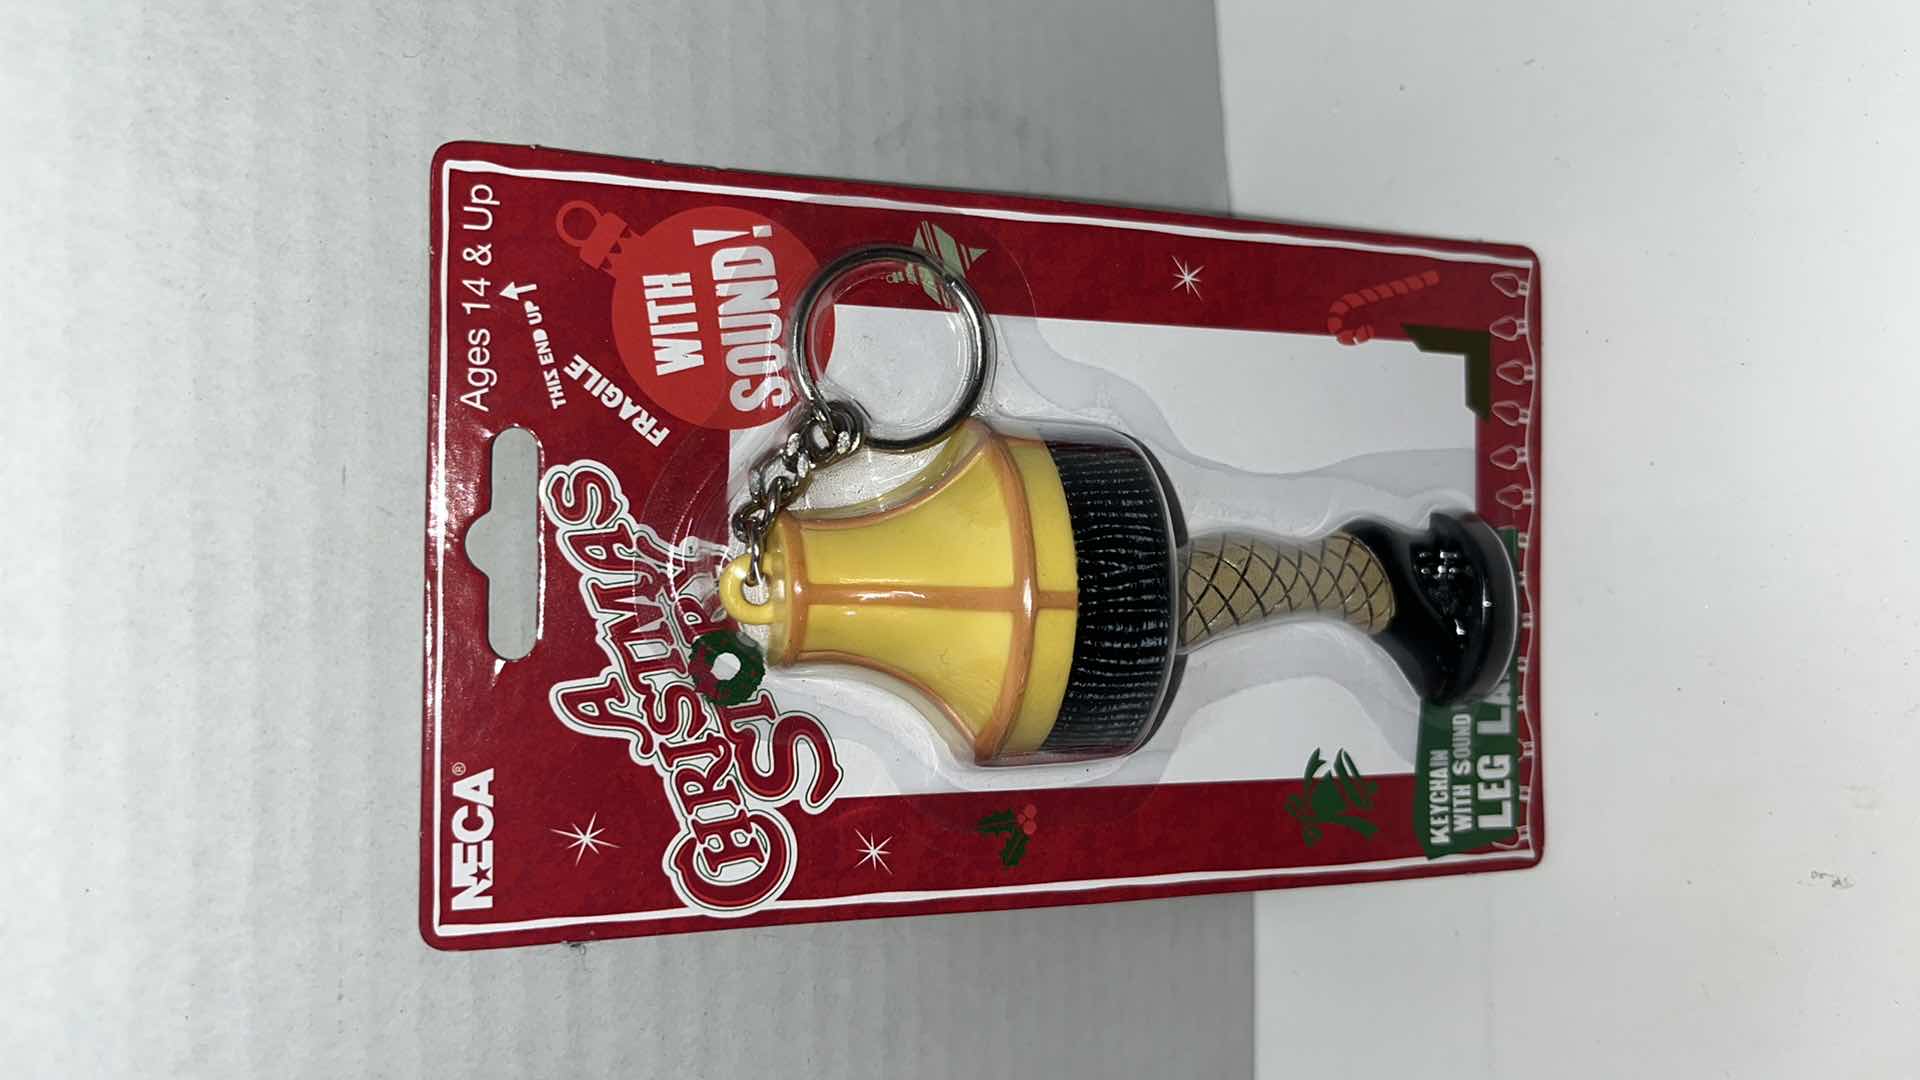 Photo 4 of BRAND NEW FUNKO GAMES A CHRISTMAS STORY “A MAJOR CARD GAME” & NECA A CHRISTMAS STORY LEG LAMP TALKING KEYCHAIN (2)